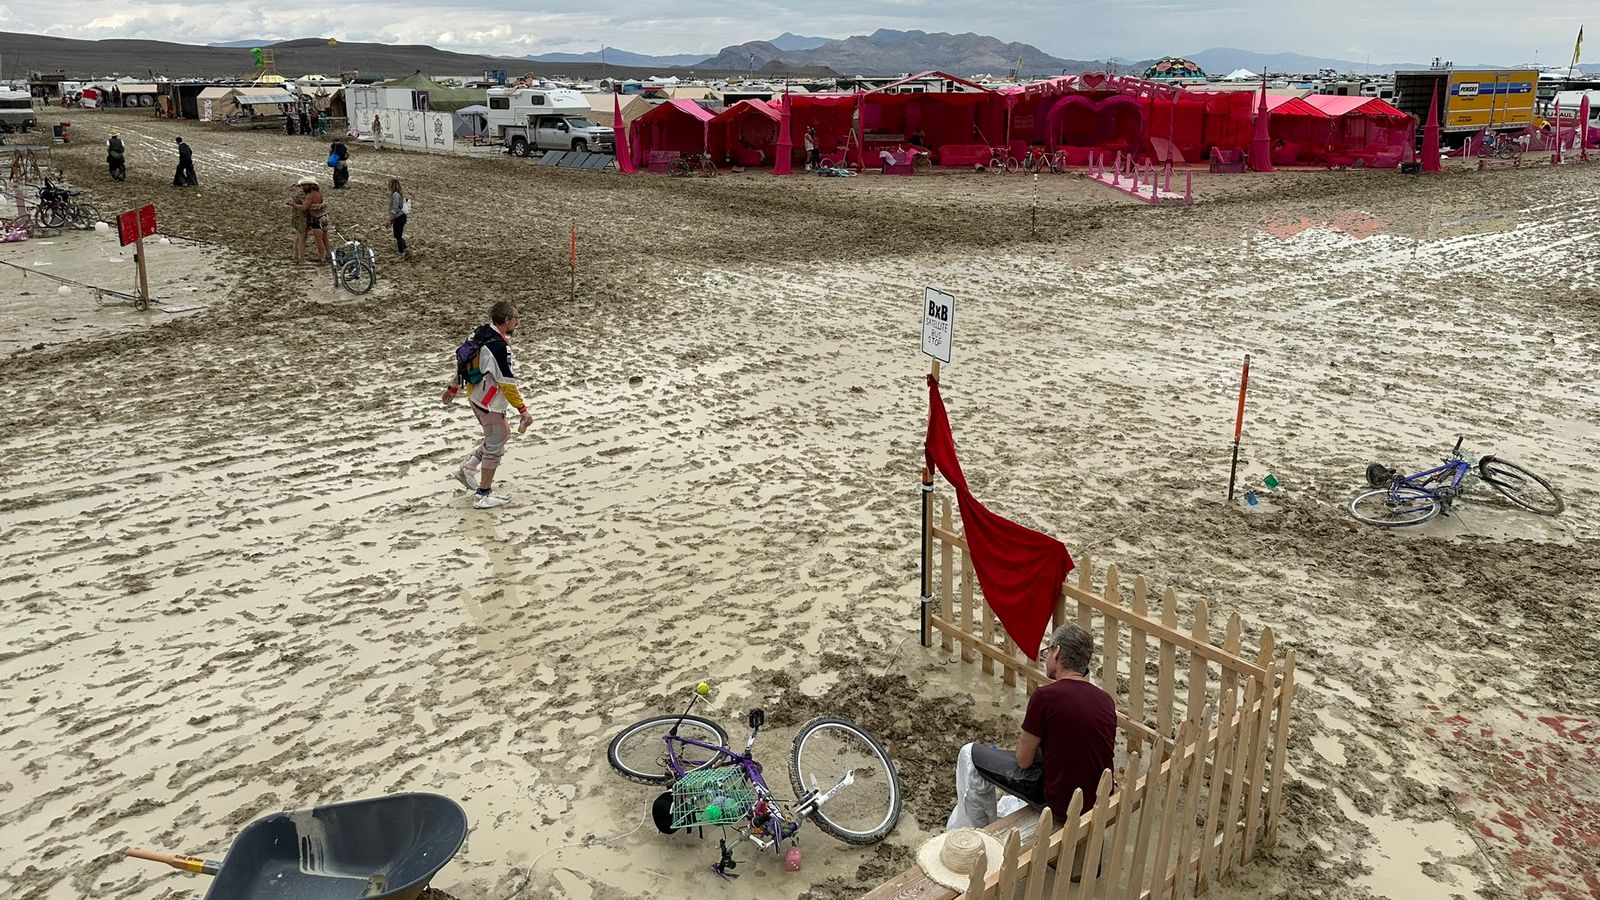 Burning Man festival-goers urged to seek shelter and conserve food amid heavy rainfall